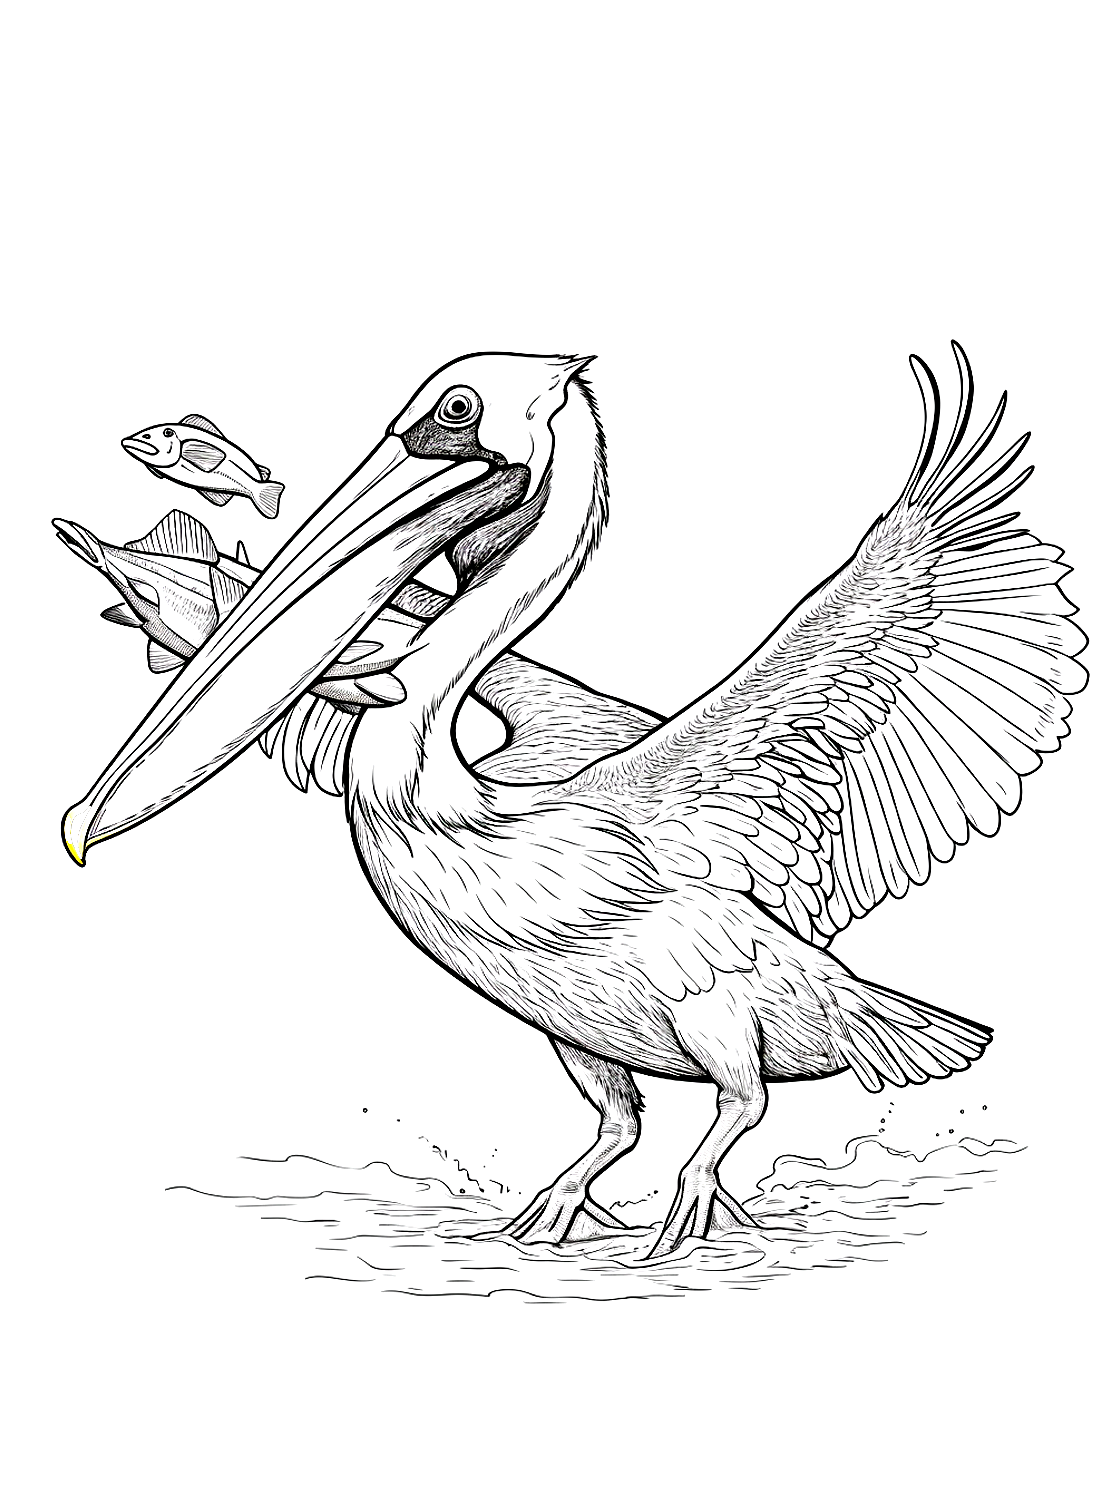 Pelican eats fishes from Pelican